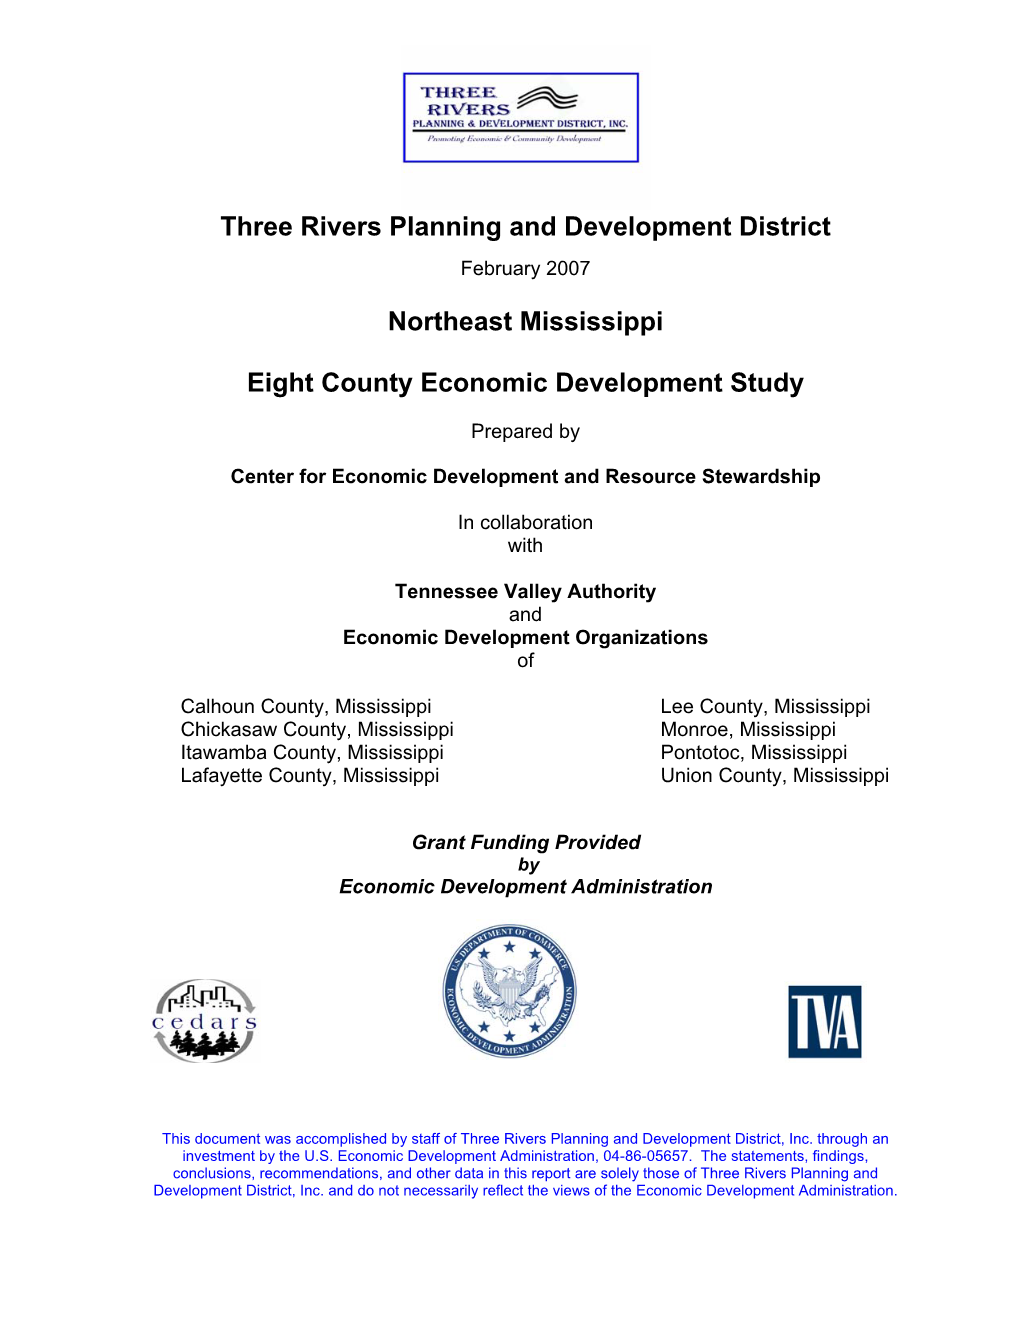 Three Rivers Planning and Development District Northeast